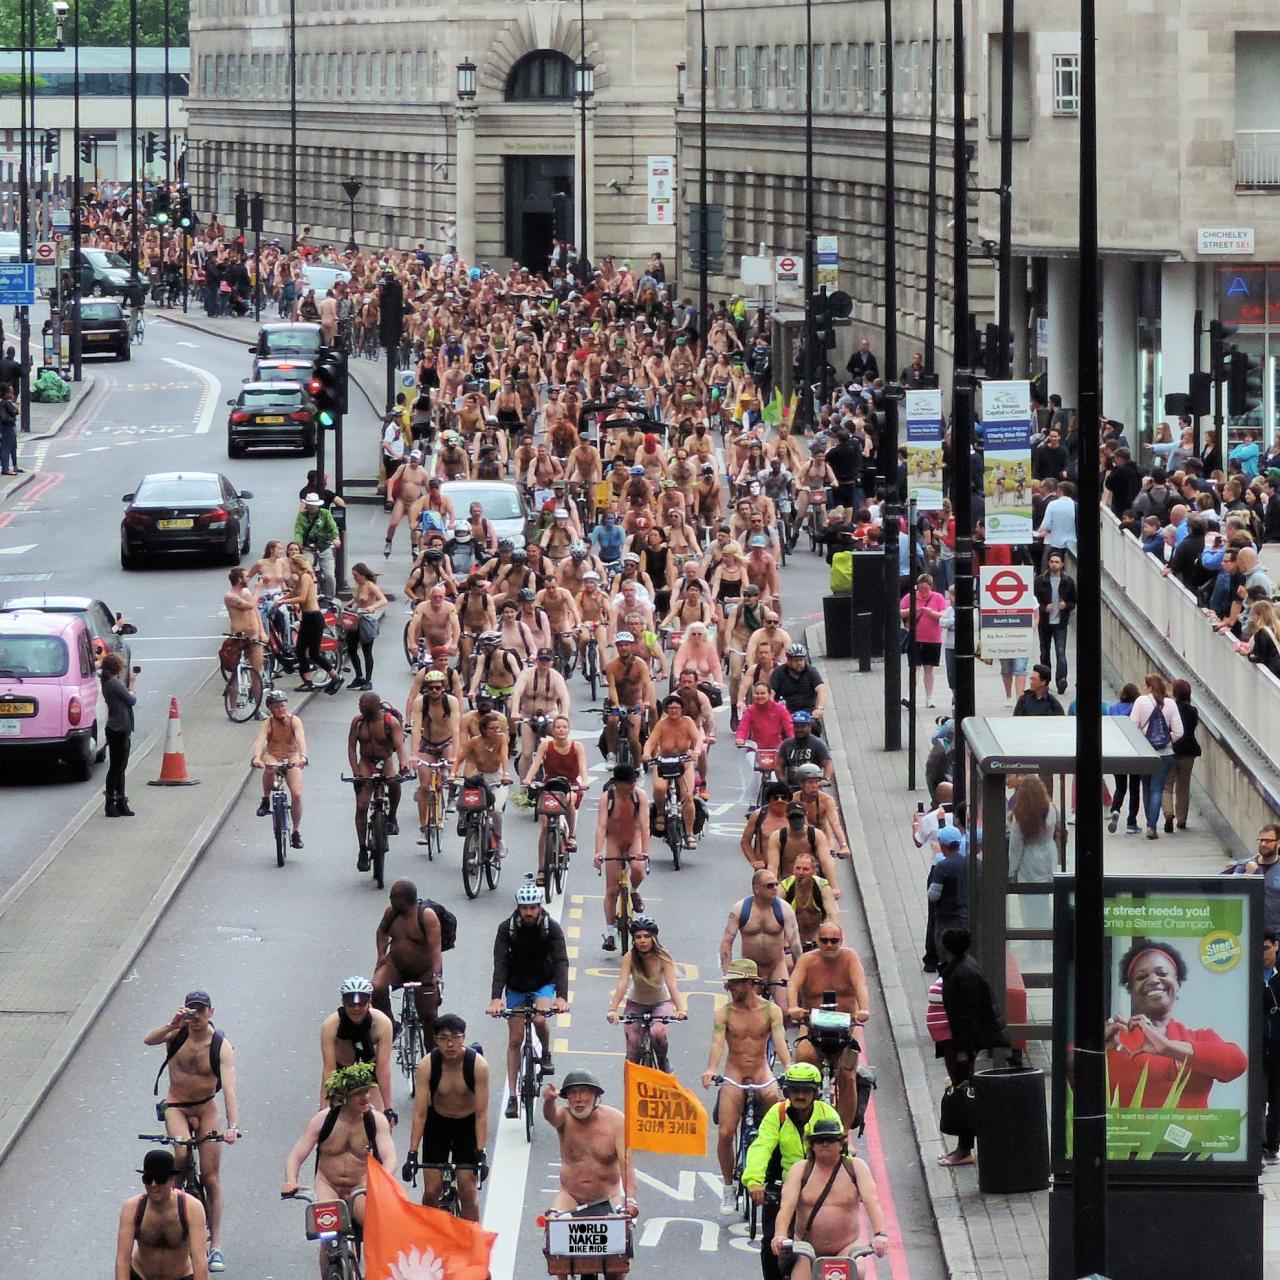 birrell pitcaithly recommends naked bike ride london pic